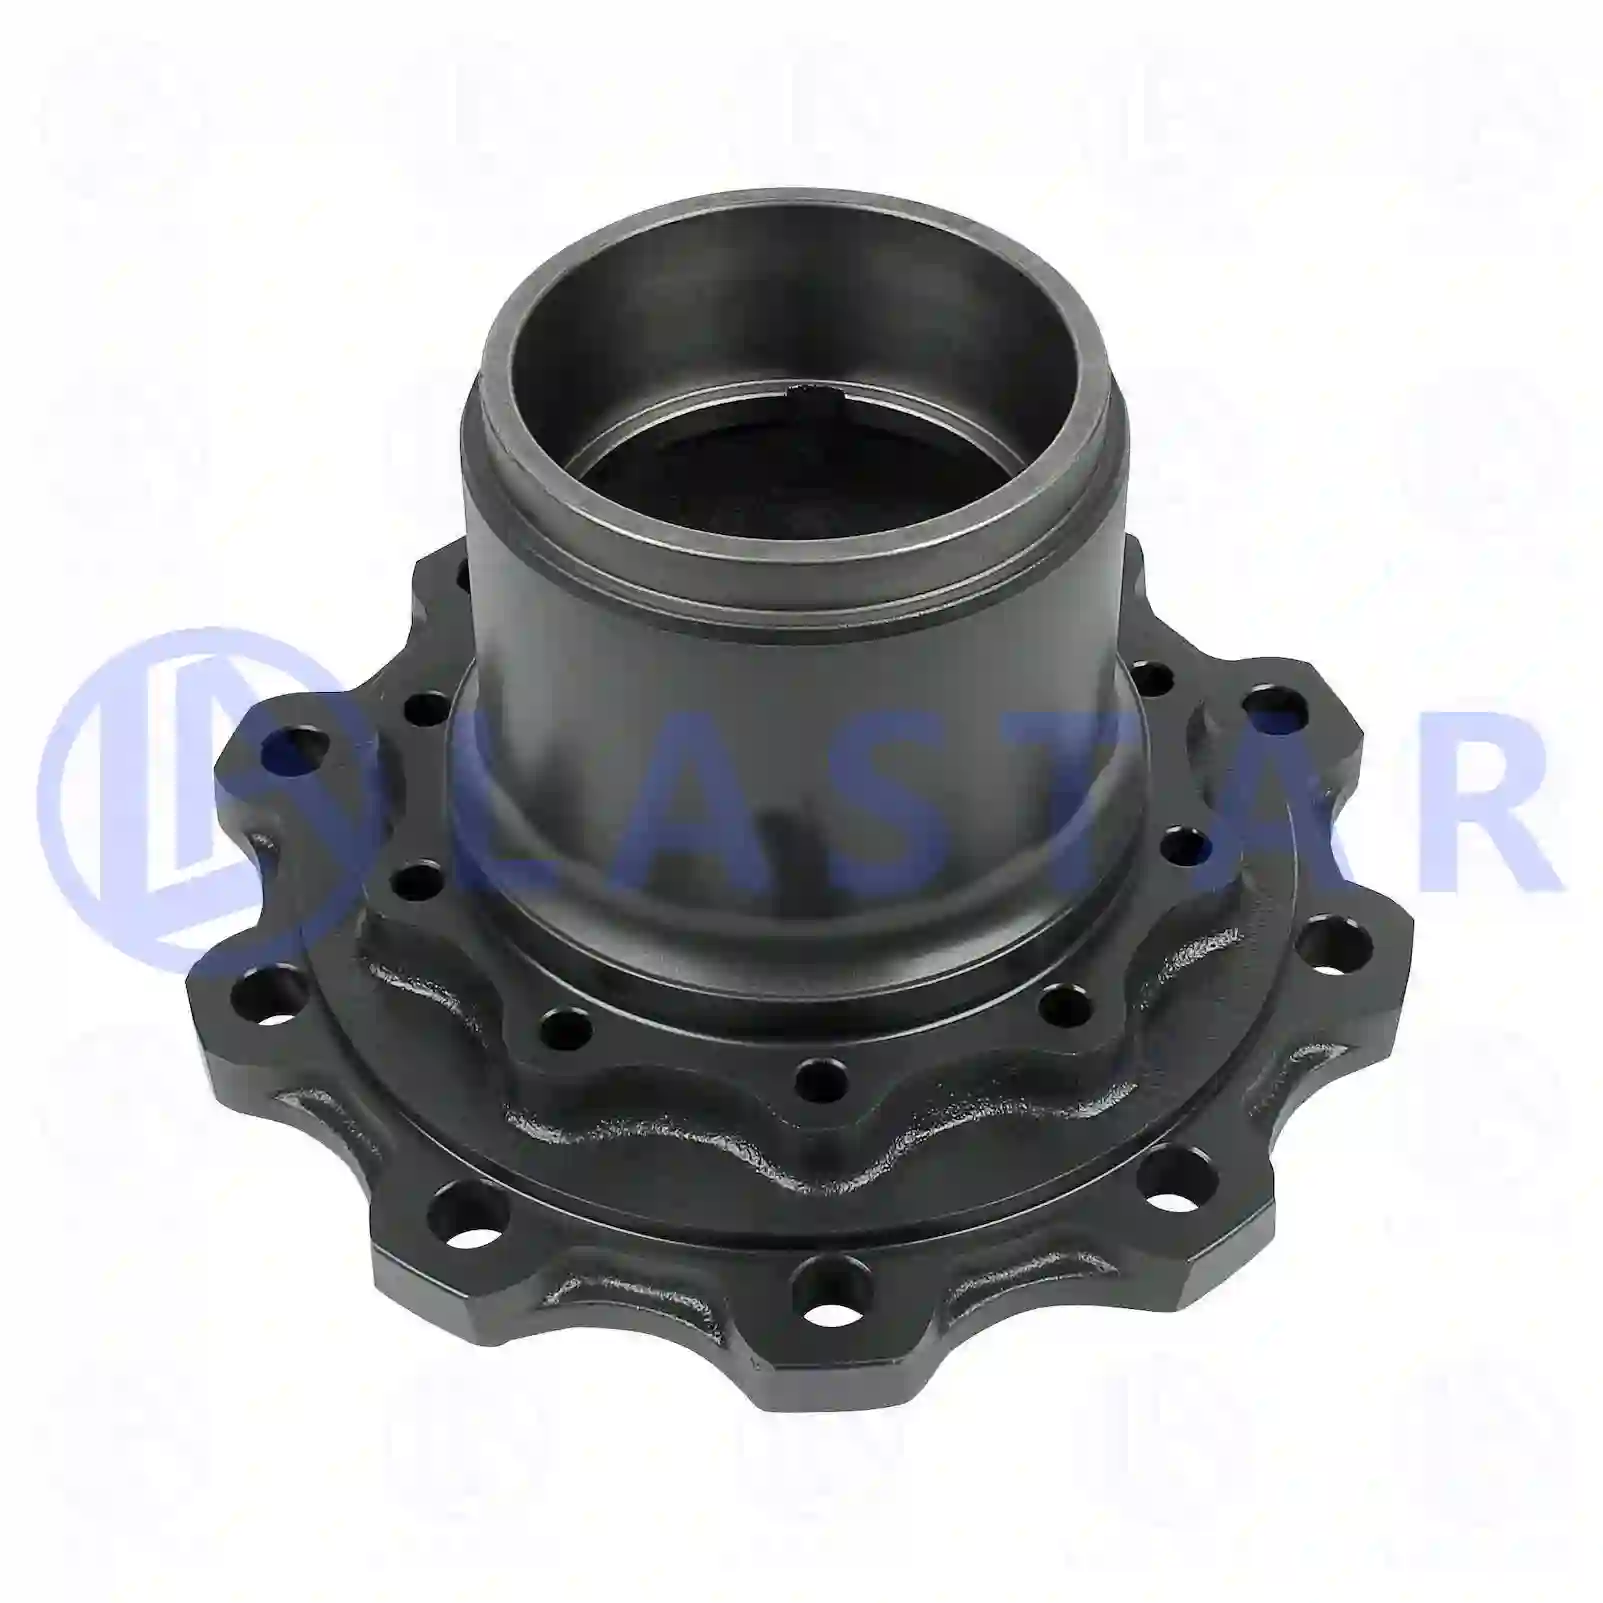 Wheel hub, without bearings, 77726324, 9423340301, 9423341401, , , , , ||  77726324 Lastar Spare Part | Truck Spare Parts, Auotomotive Spare Parts Wheel hub, without bearings, 77726324, 9423340301, 9423341401, , , , , ||  77726324 Lastar Spare Part | Truck Spare Parts, Auotomotive Spare Parts